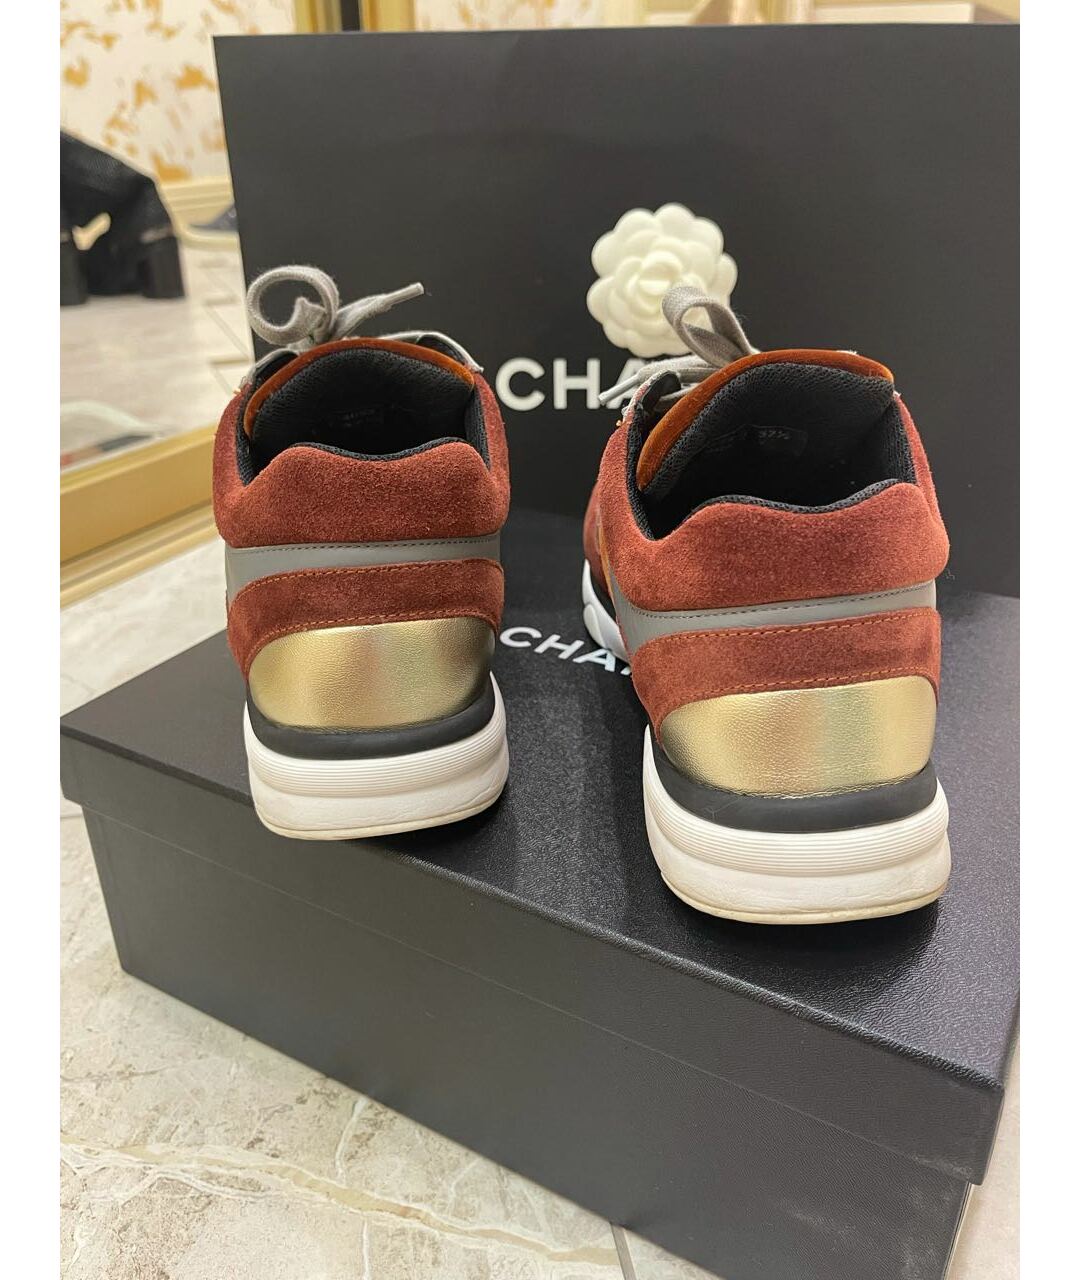 CHANEL PRE-OWNED Мульти бархатные кроссовки, фото 4